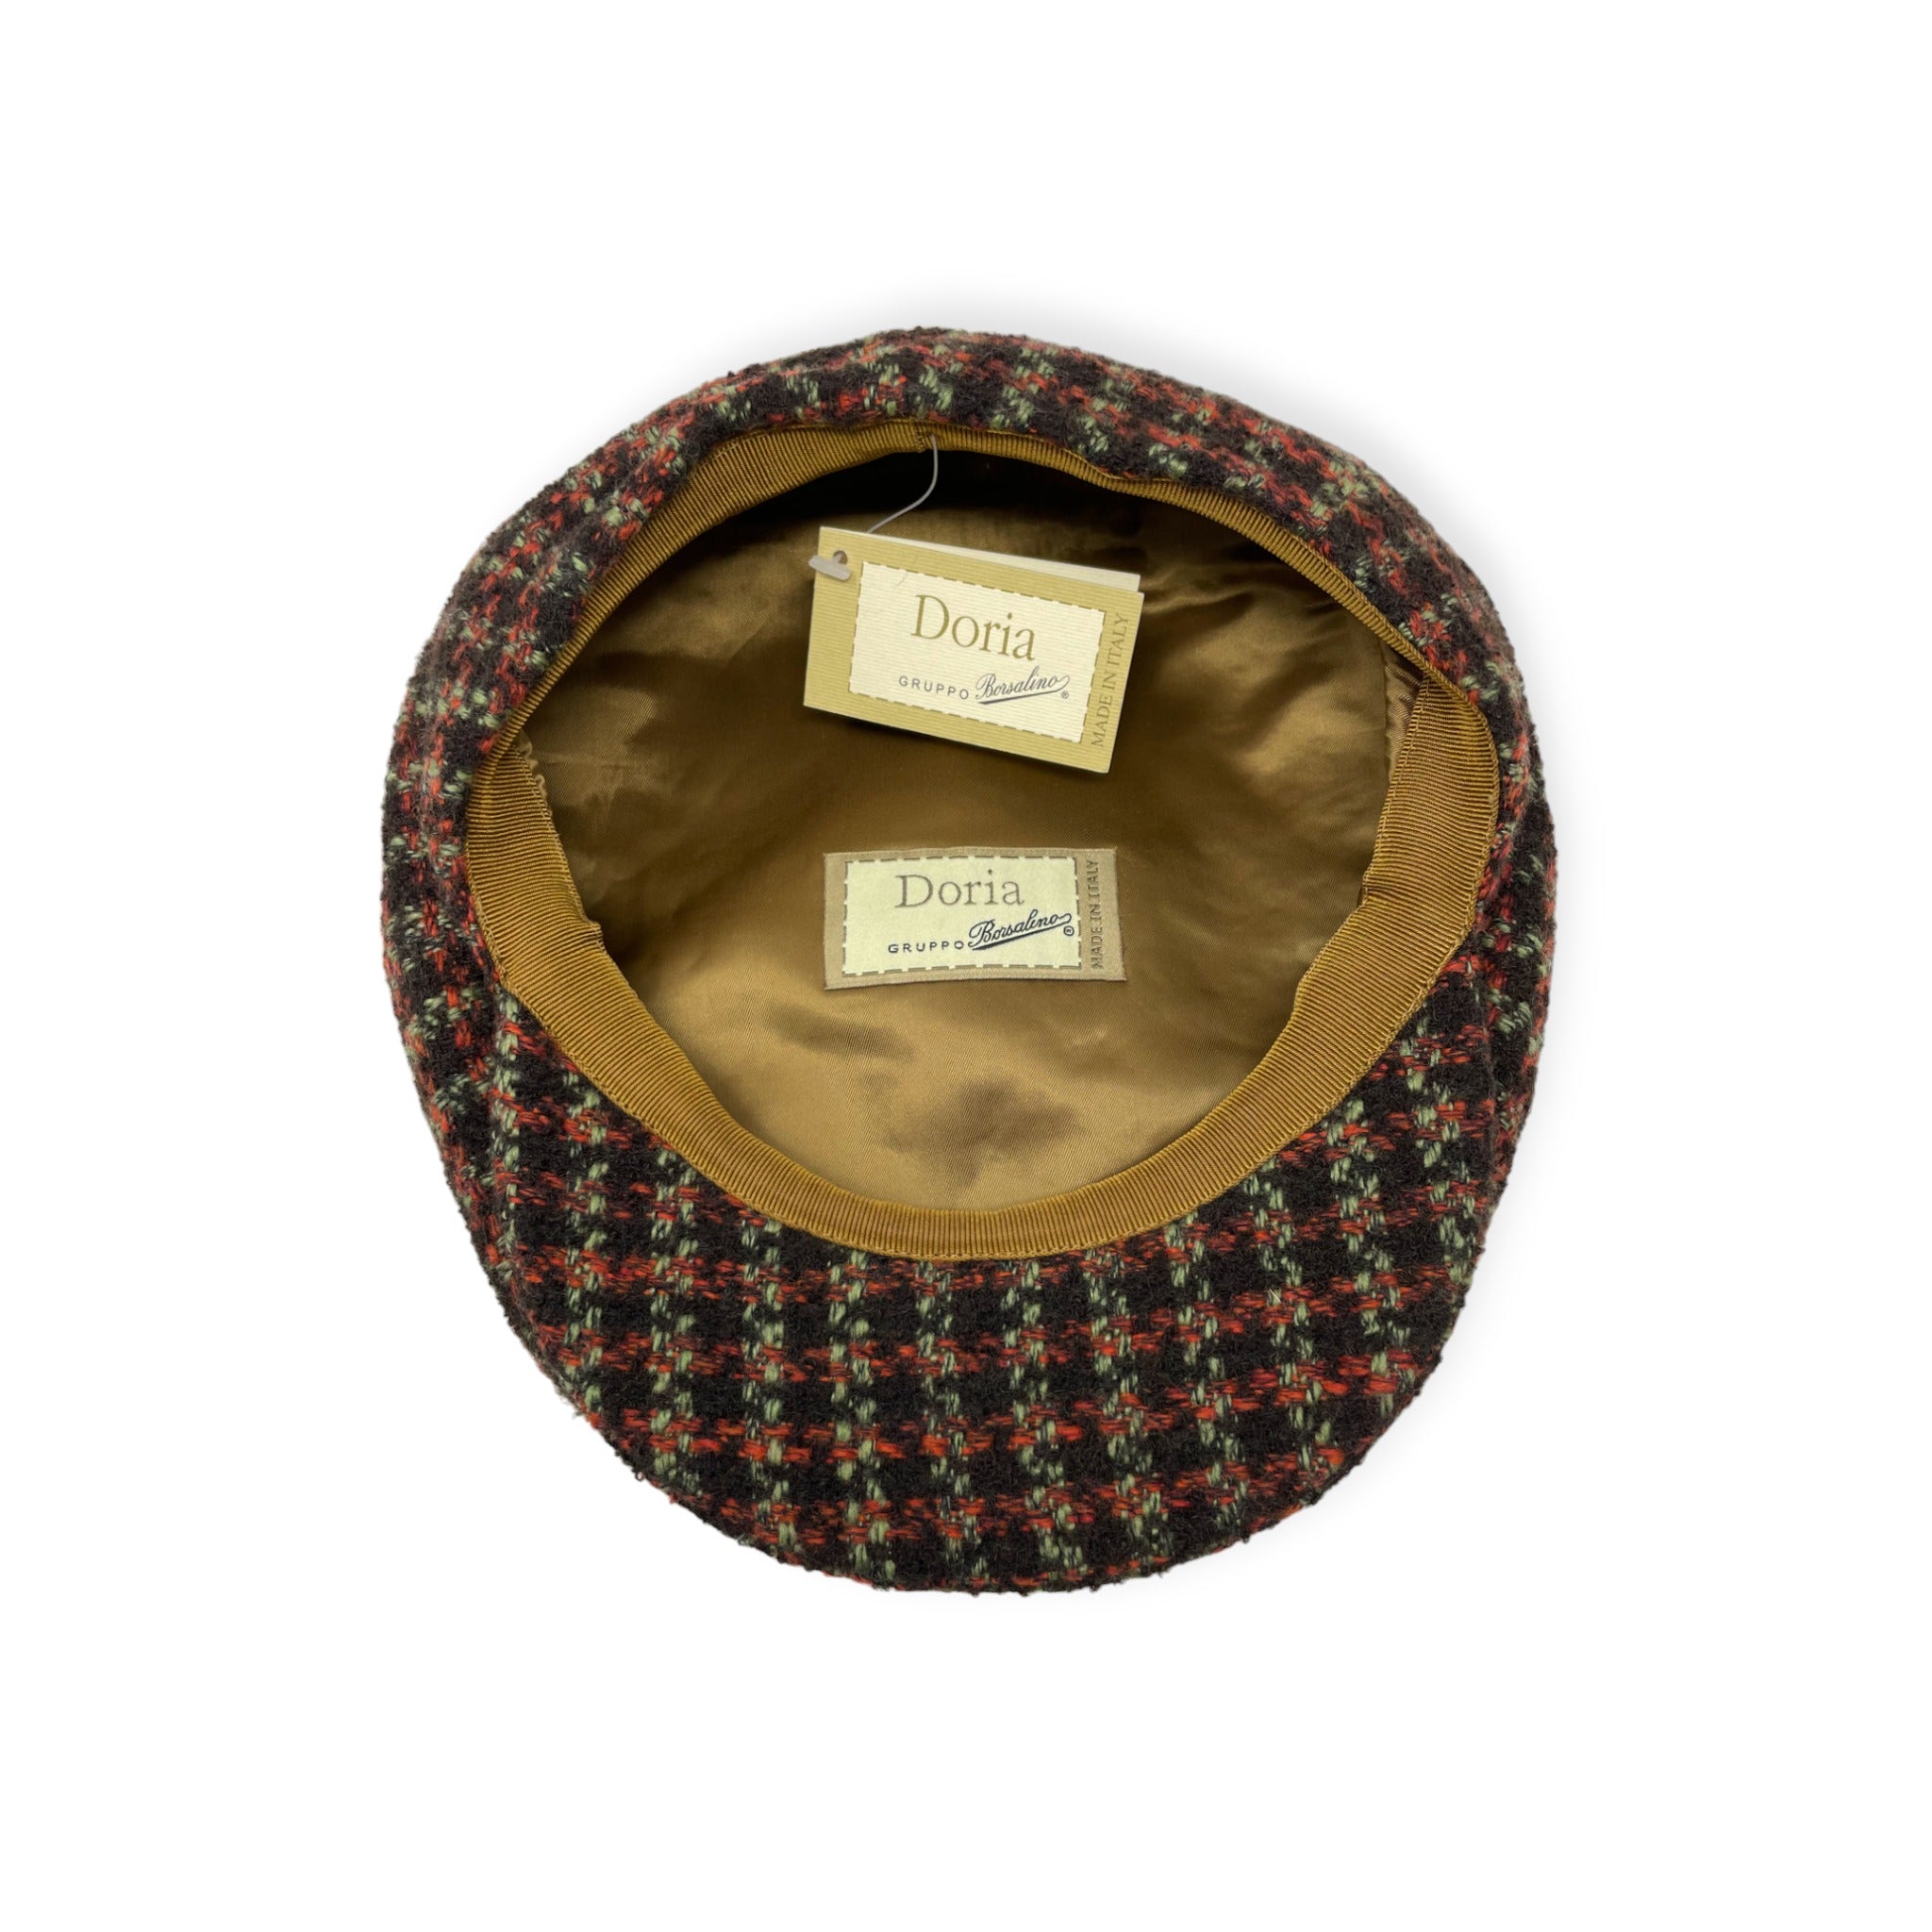 Top down view of the inside of Borsalino tweed newsboy cap with tag and label